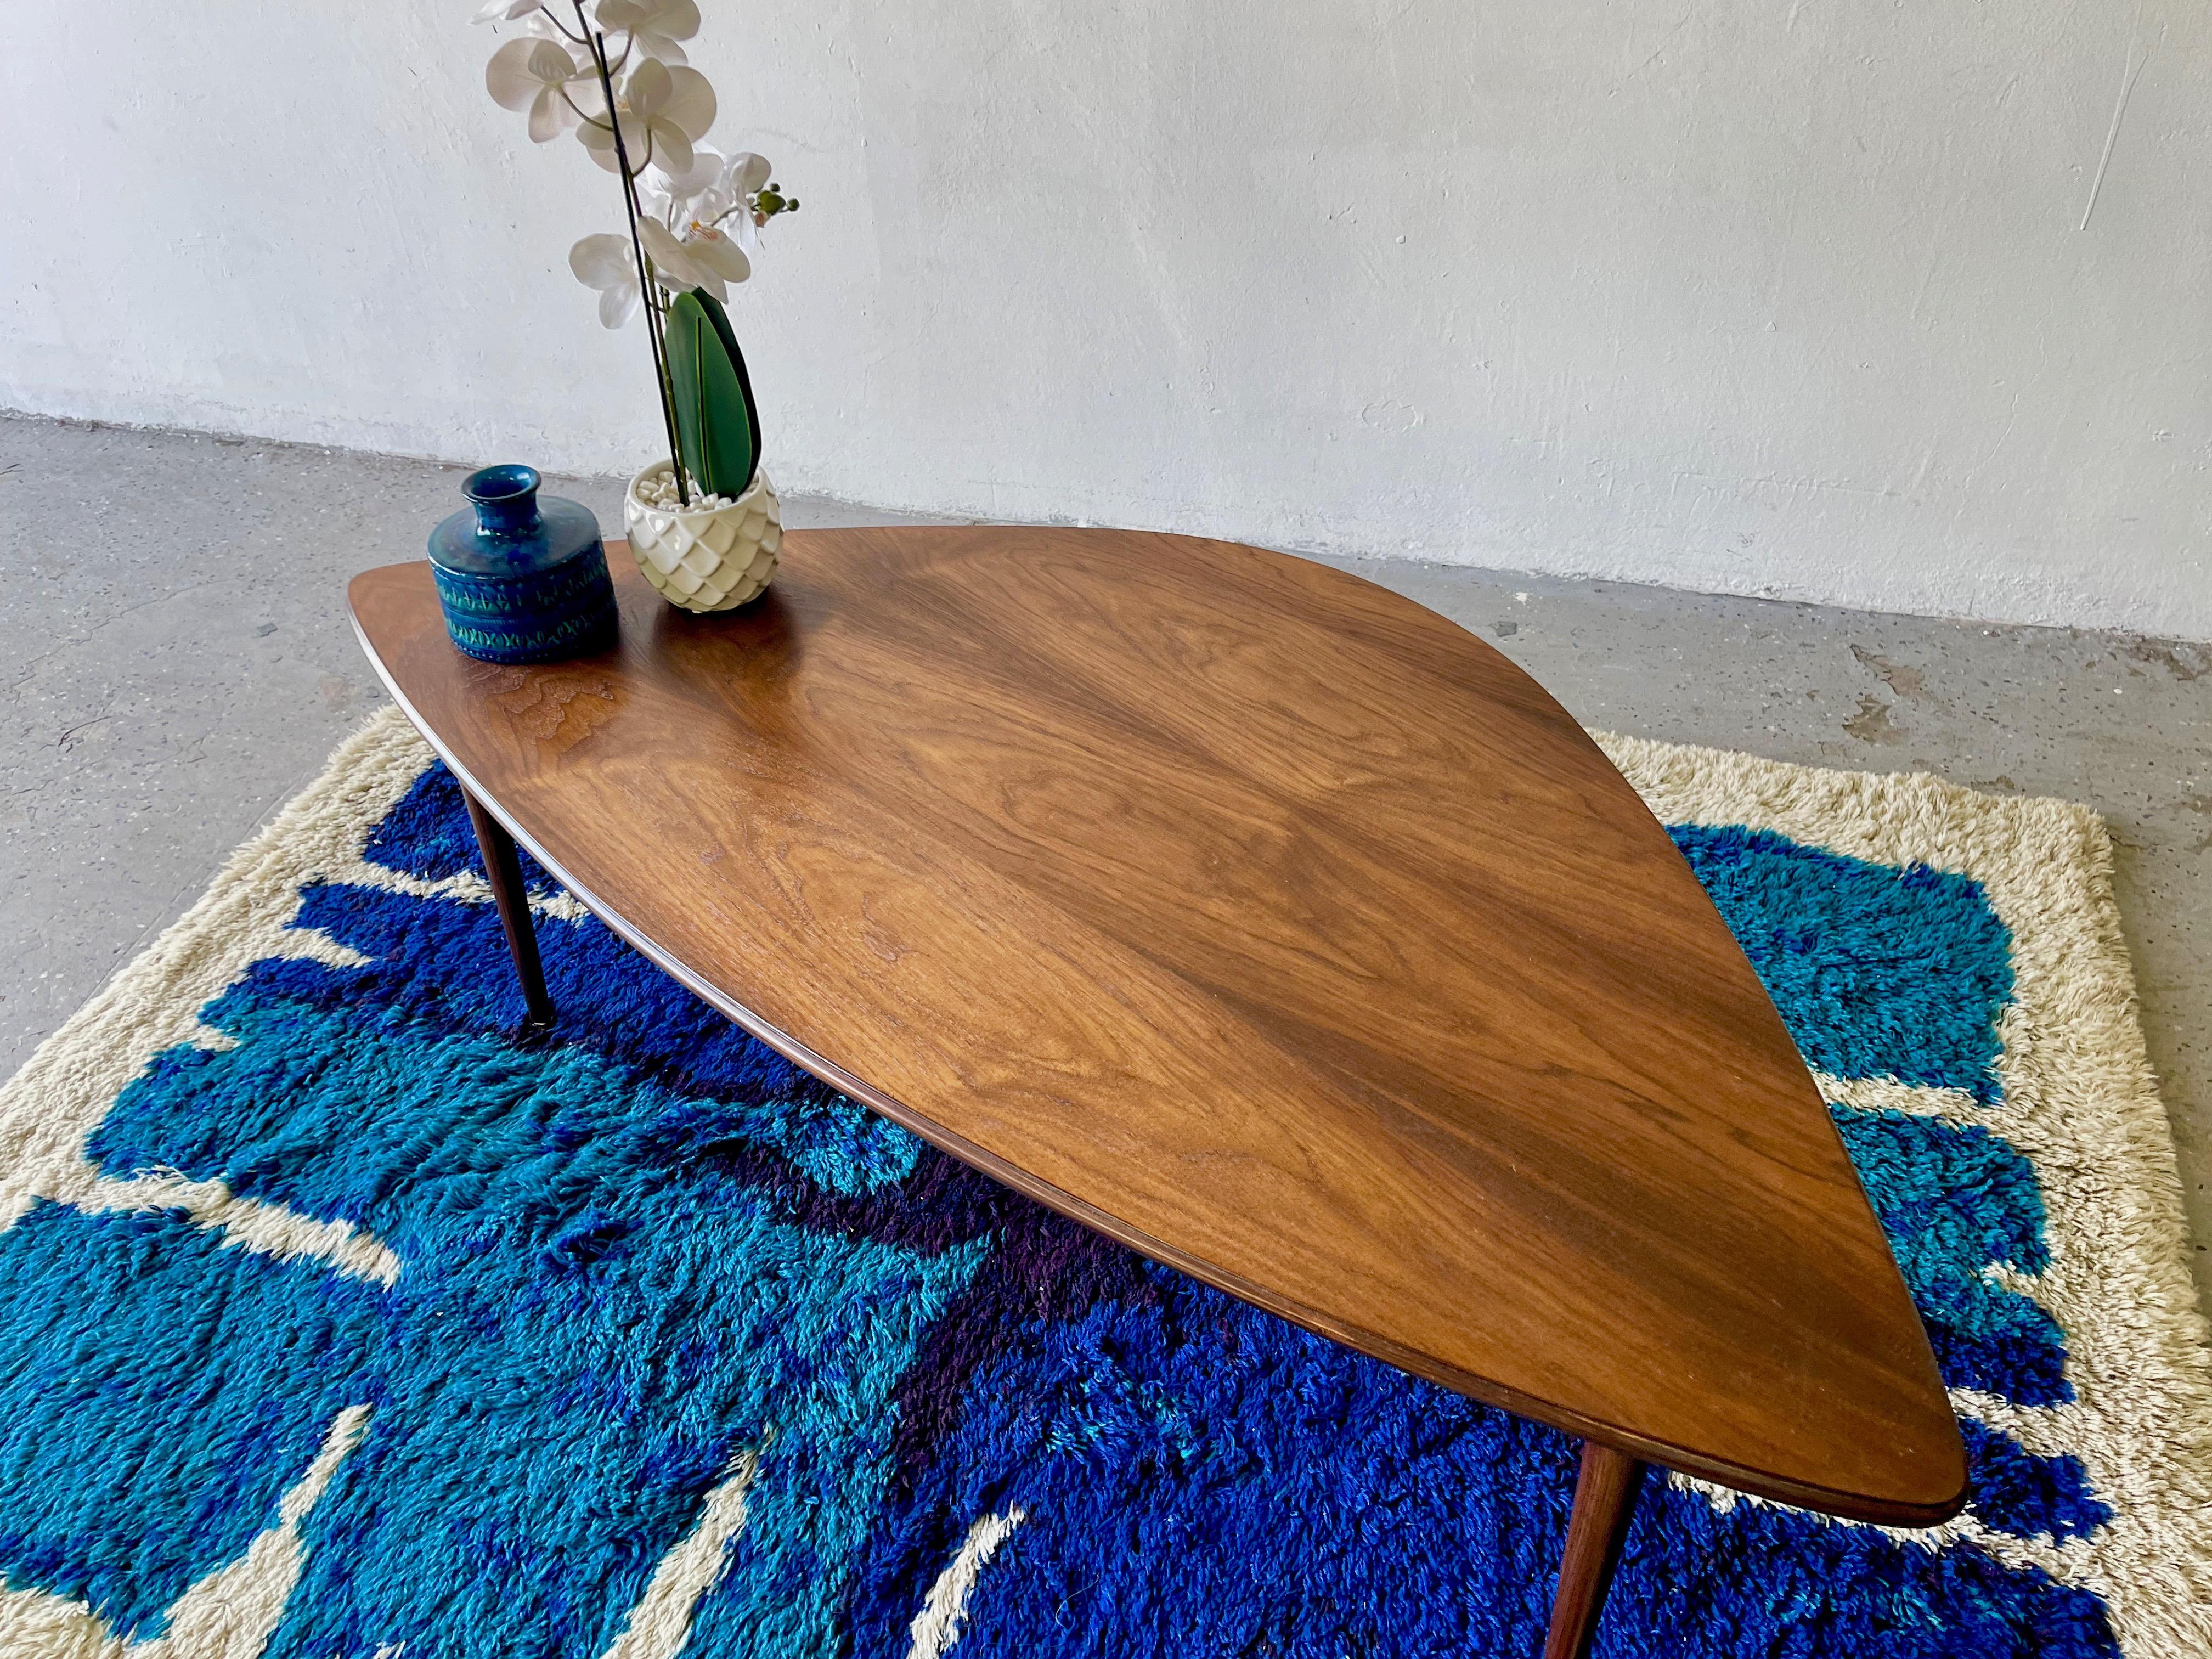 Gorgous Mid-Century Modern free form coffee table.
Vintage modern free-form coffee table. minimalist Mid-Century Modern table features a beautiful and walnut top with an organic shape. With stunning grain detail throughout, adding a warm flair to